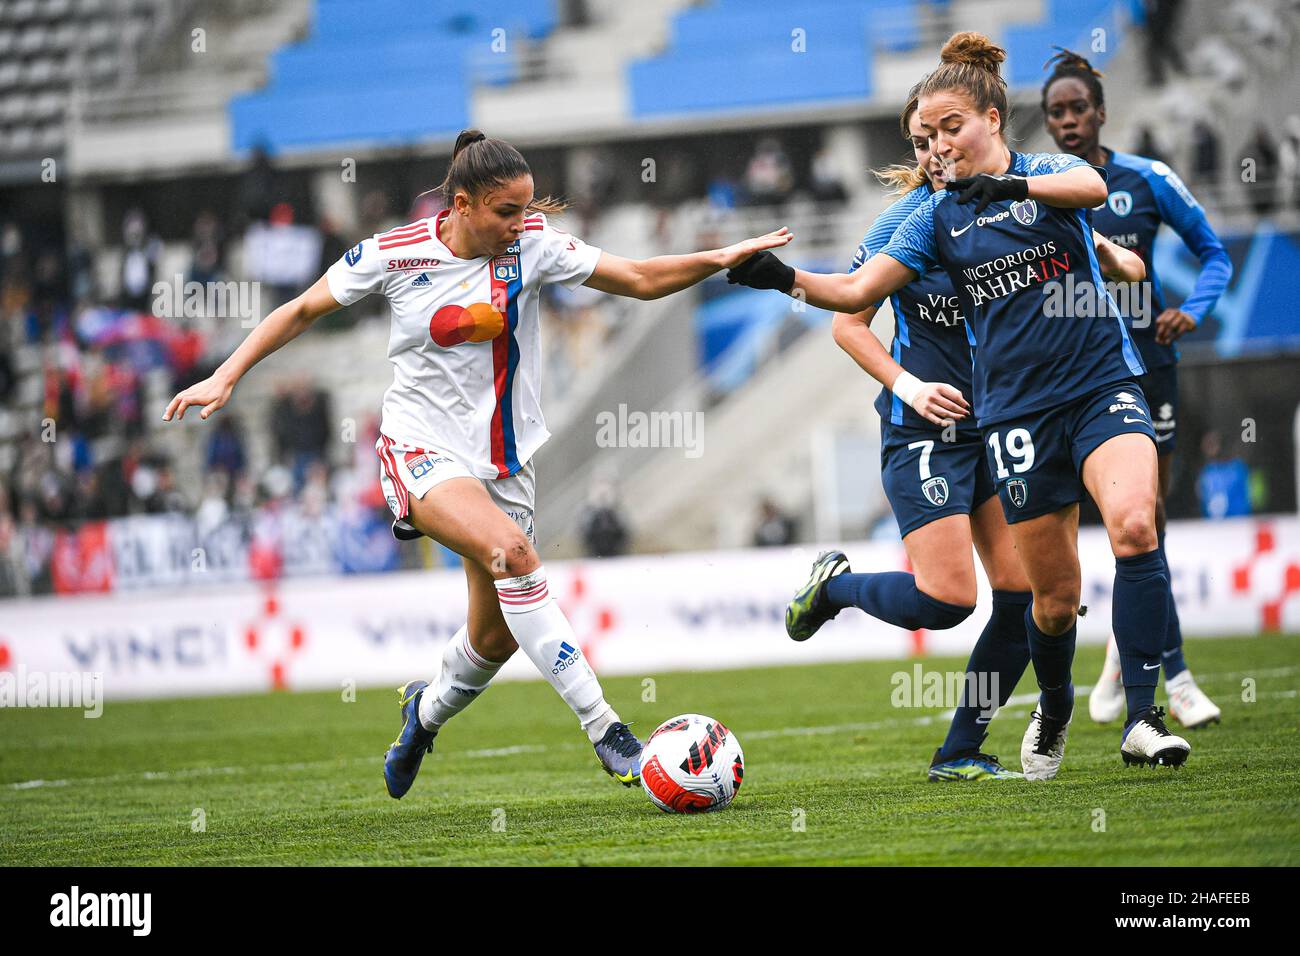 Paris, France. 12th Dec, 2021. Delphine Cascarino and Thea Greboval of Olympique Lyonnais during the Women's French championship, D1 Arkema football match between Paris FC and Olympique Lyonnais (OL) on December 12, 2021 at Charlety Stadium in Paris, France. Photo by Victor Joly/ABACAPRESS.COM Credit: Victor Joly/Alamy Live News Stock Photo